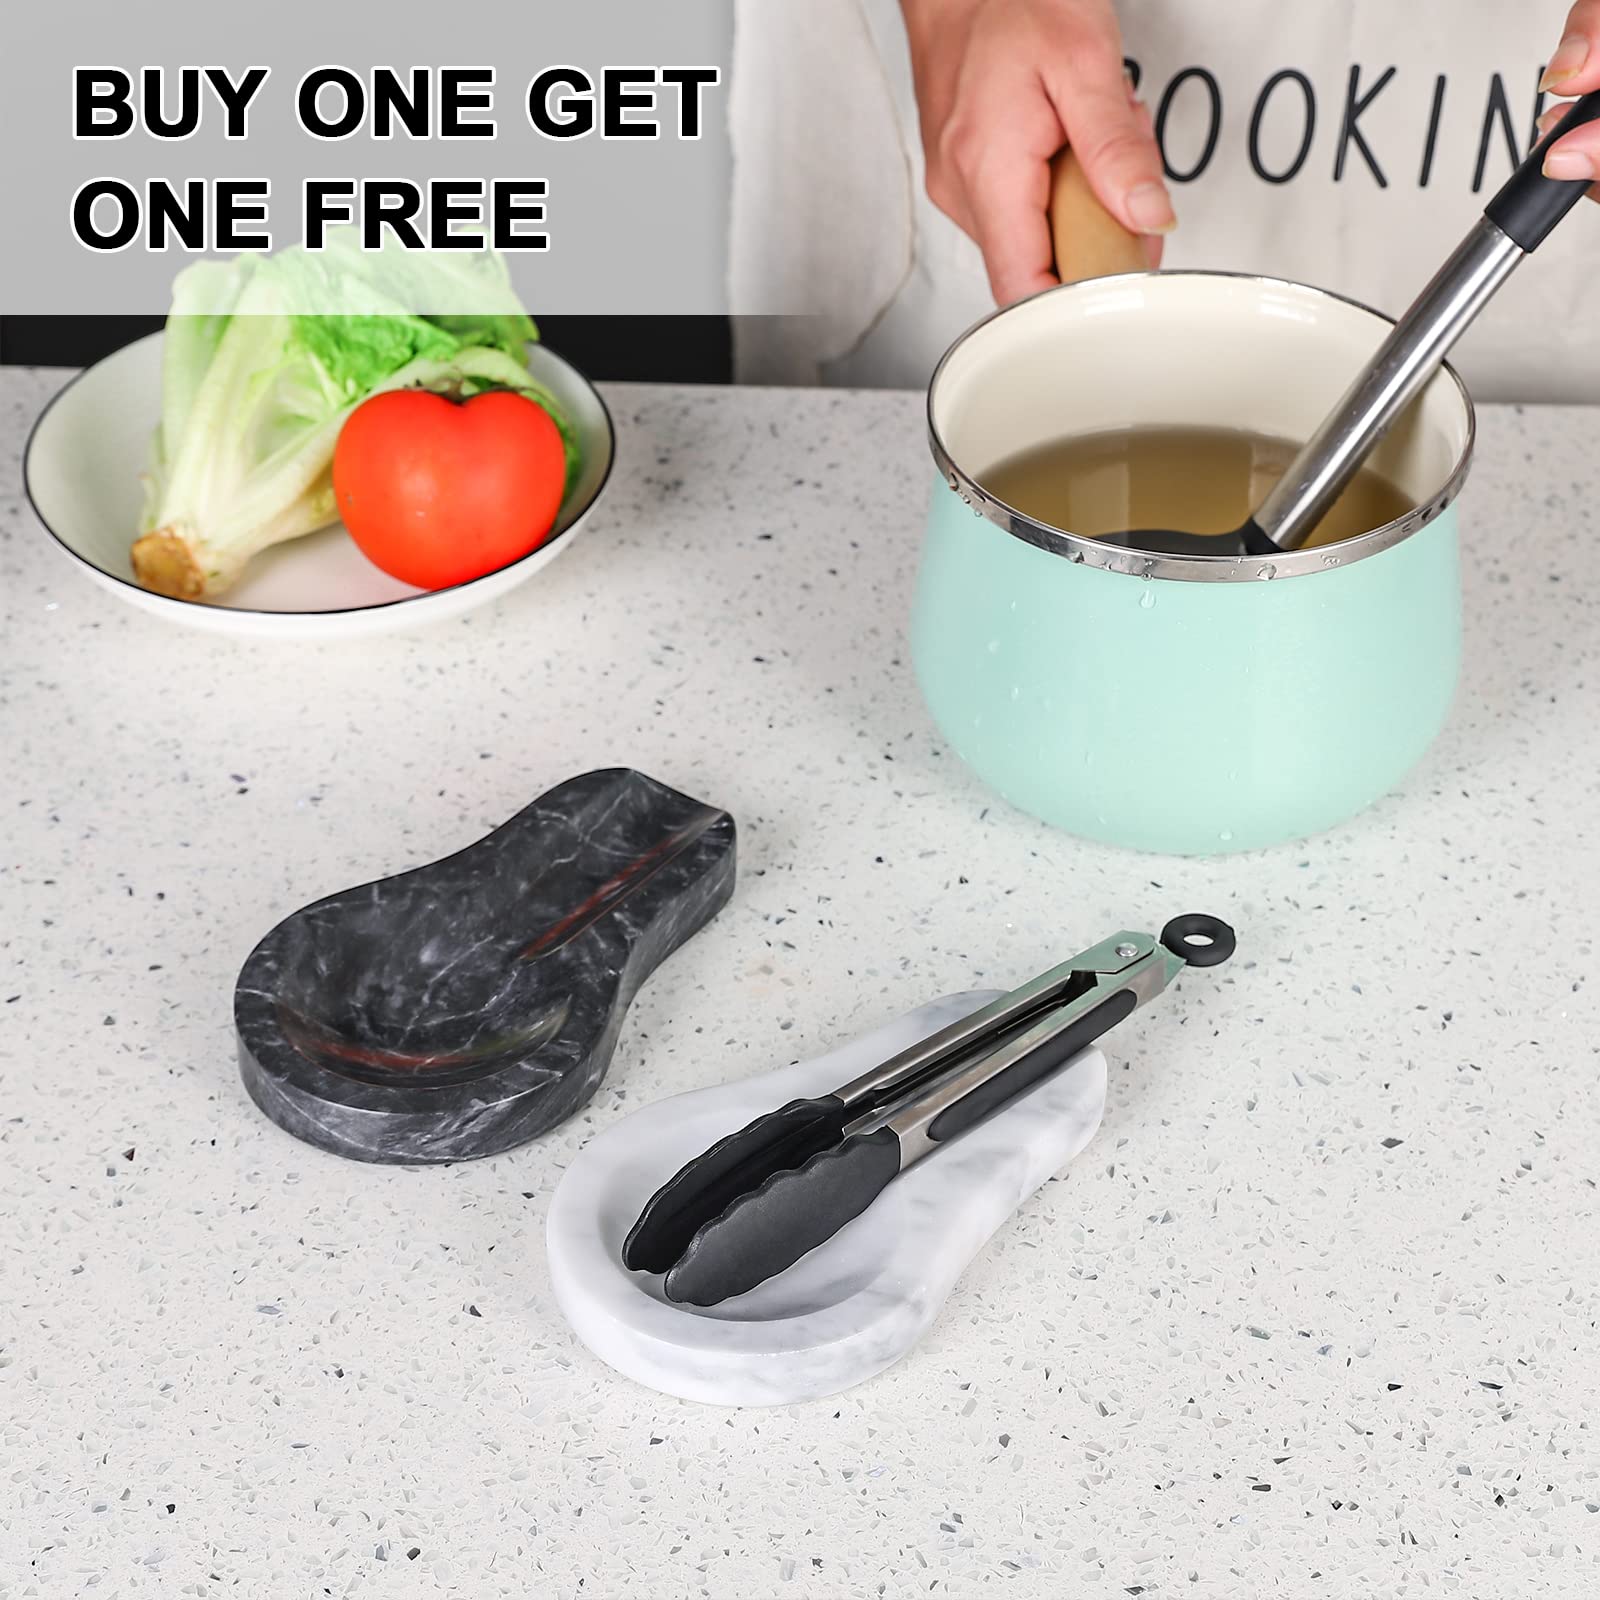 HESHIBI Spoon Rest, 2 Packs Marble Spoon Rest for Kitchen Stove Countertop, Marble Utensil Holder, Perfect for Spatula, Ladle, Fork (White and Black)